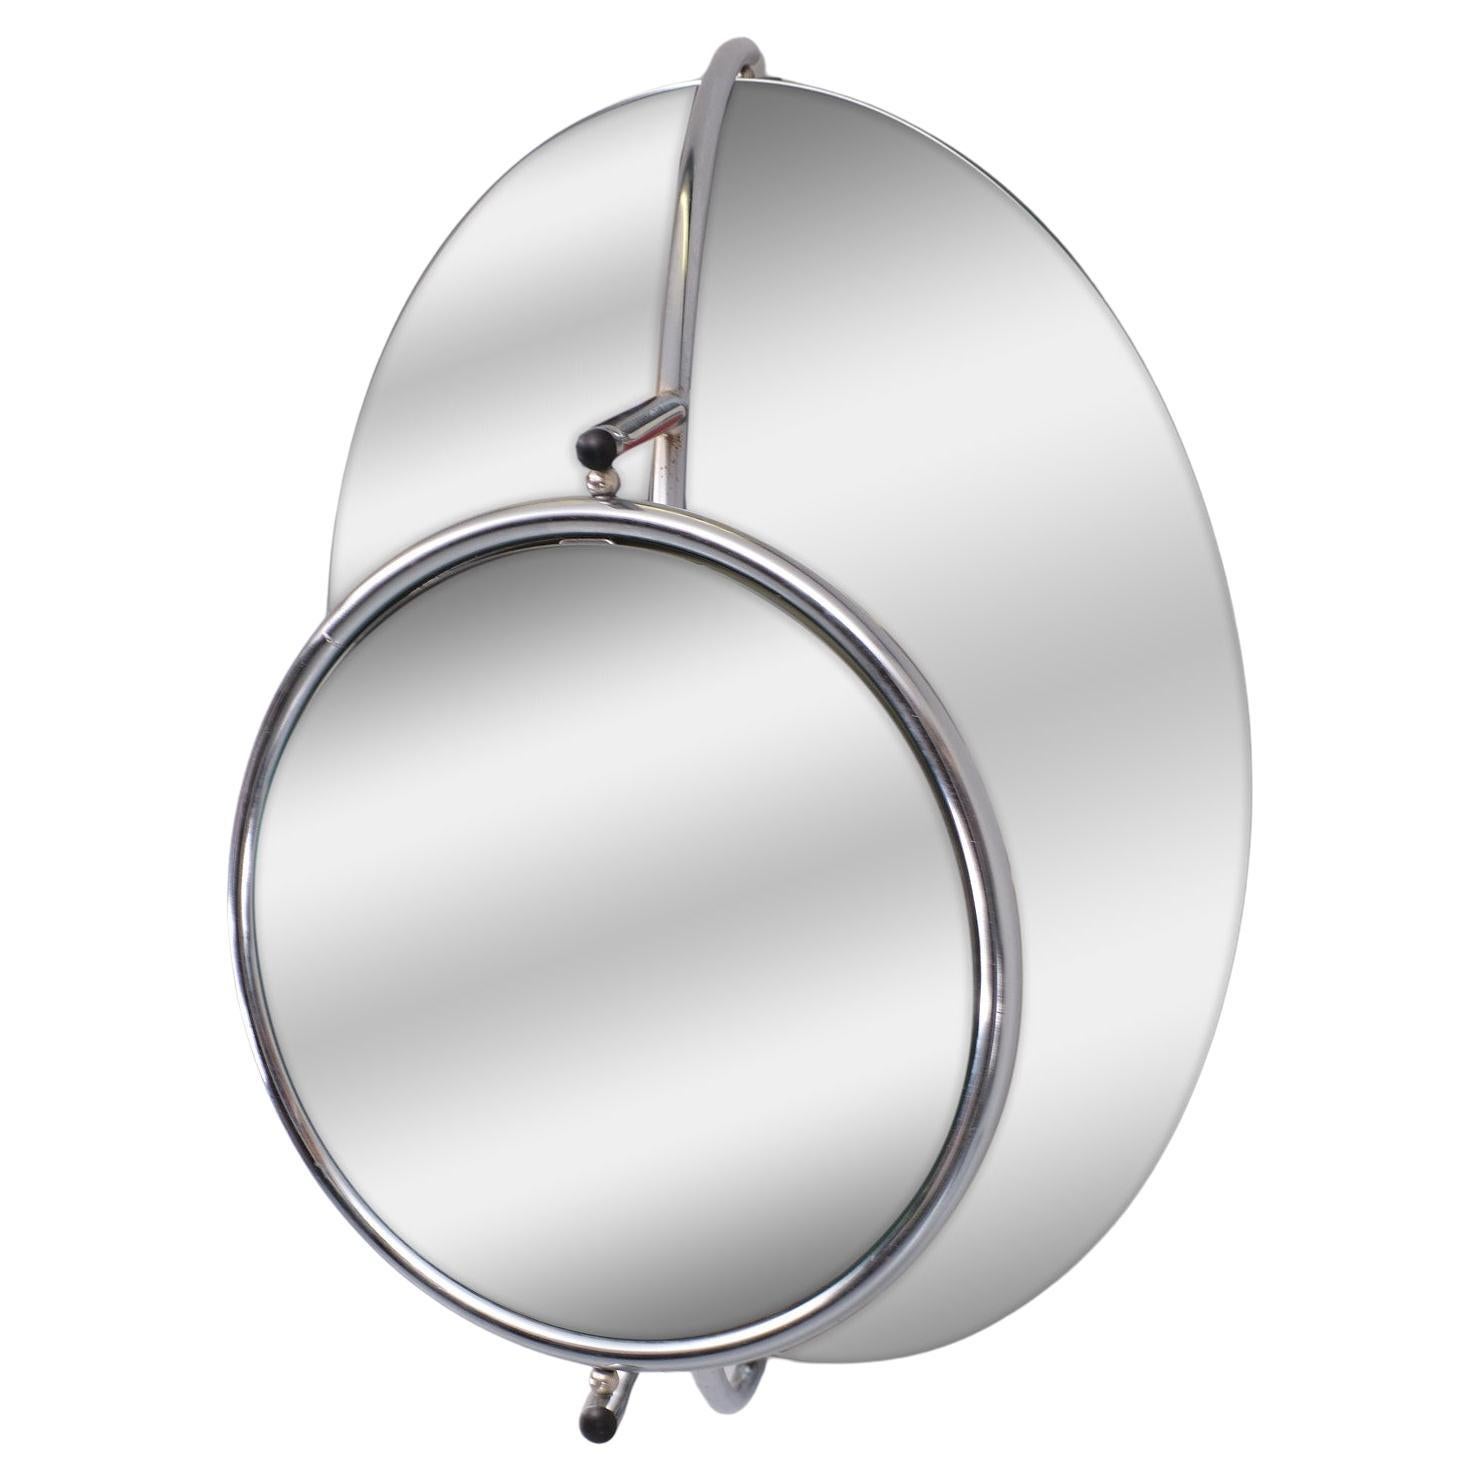 Modernist wall mirror by Rodney Kinsman for Bieffeplast, Italy, 1980s. Two-piece swivel double mirror in Chrome on  iron frame which can be hung vertically or horizontally. Minimalist functional design. . 